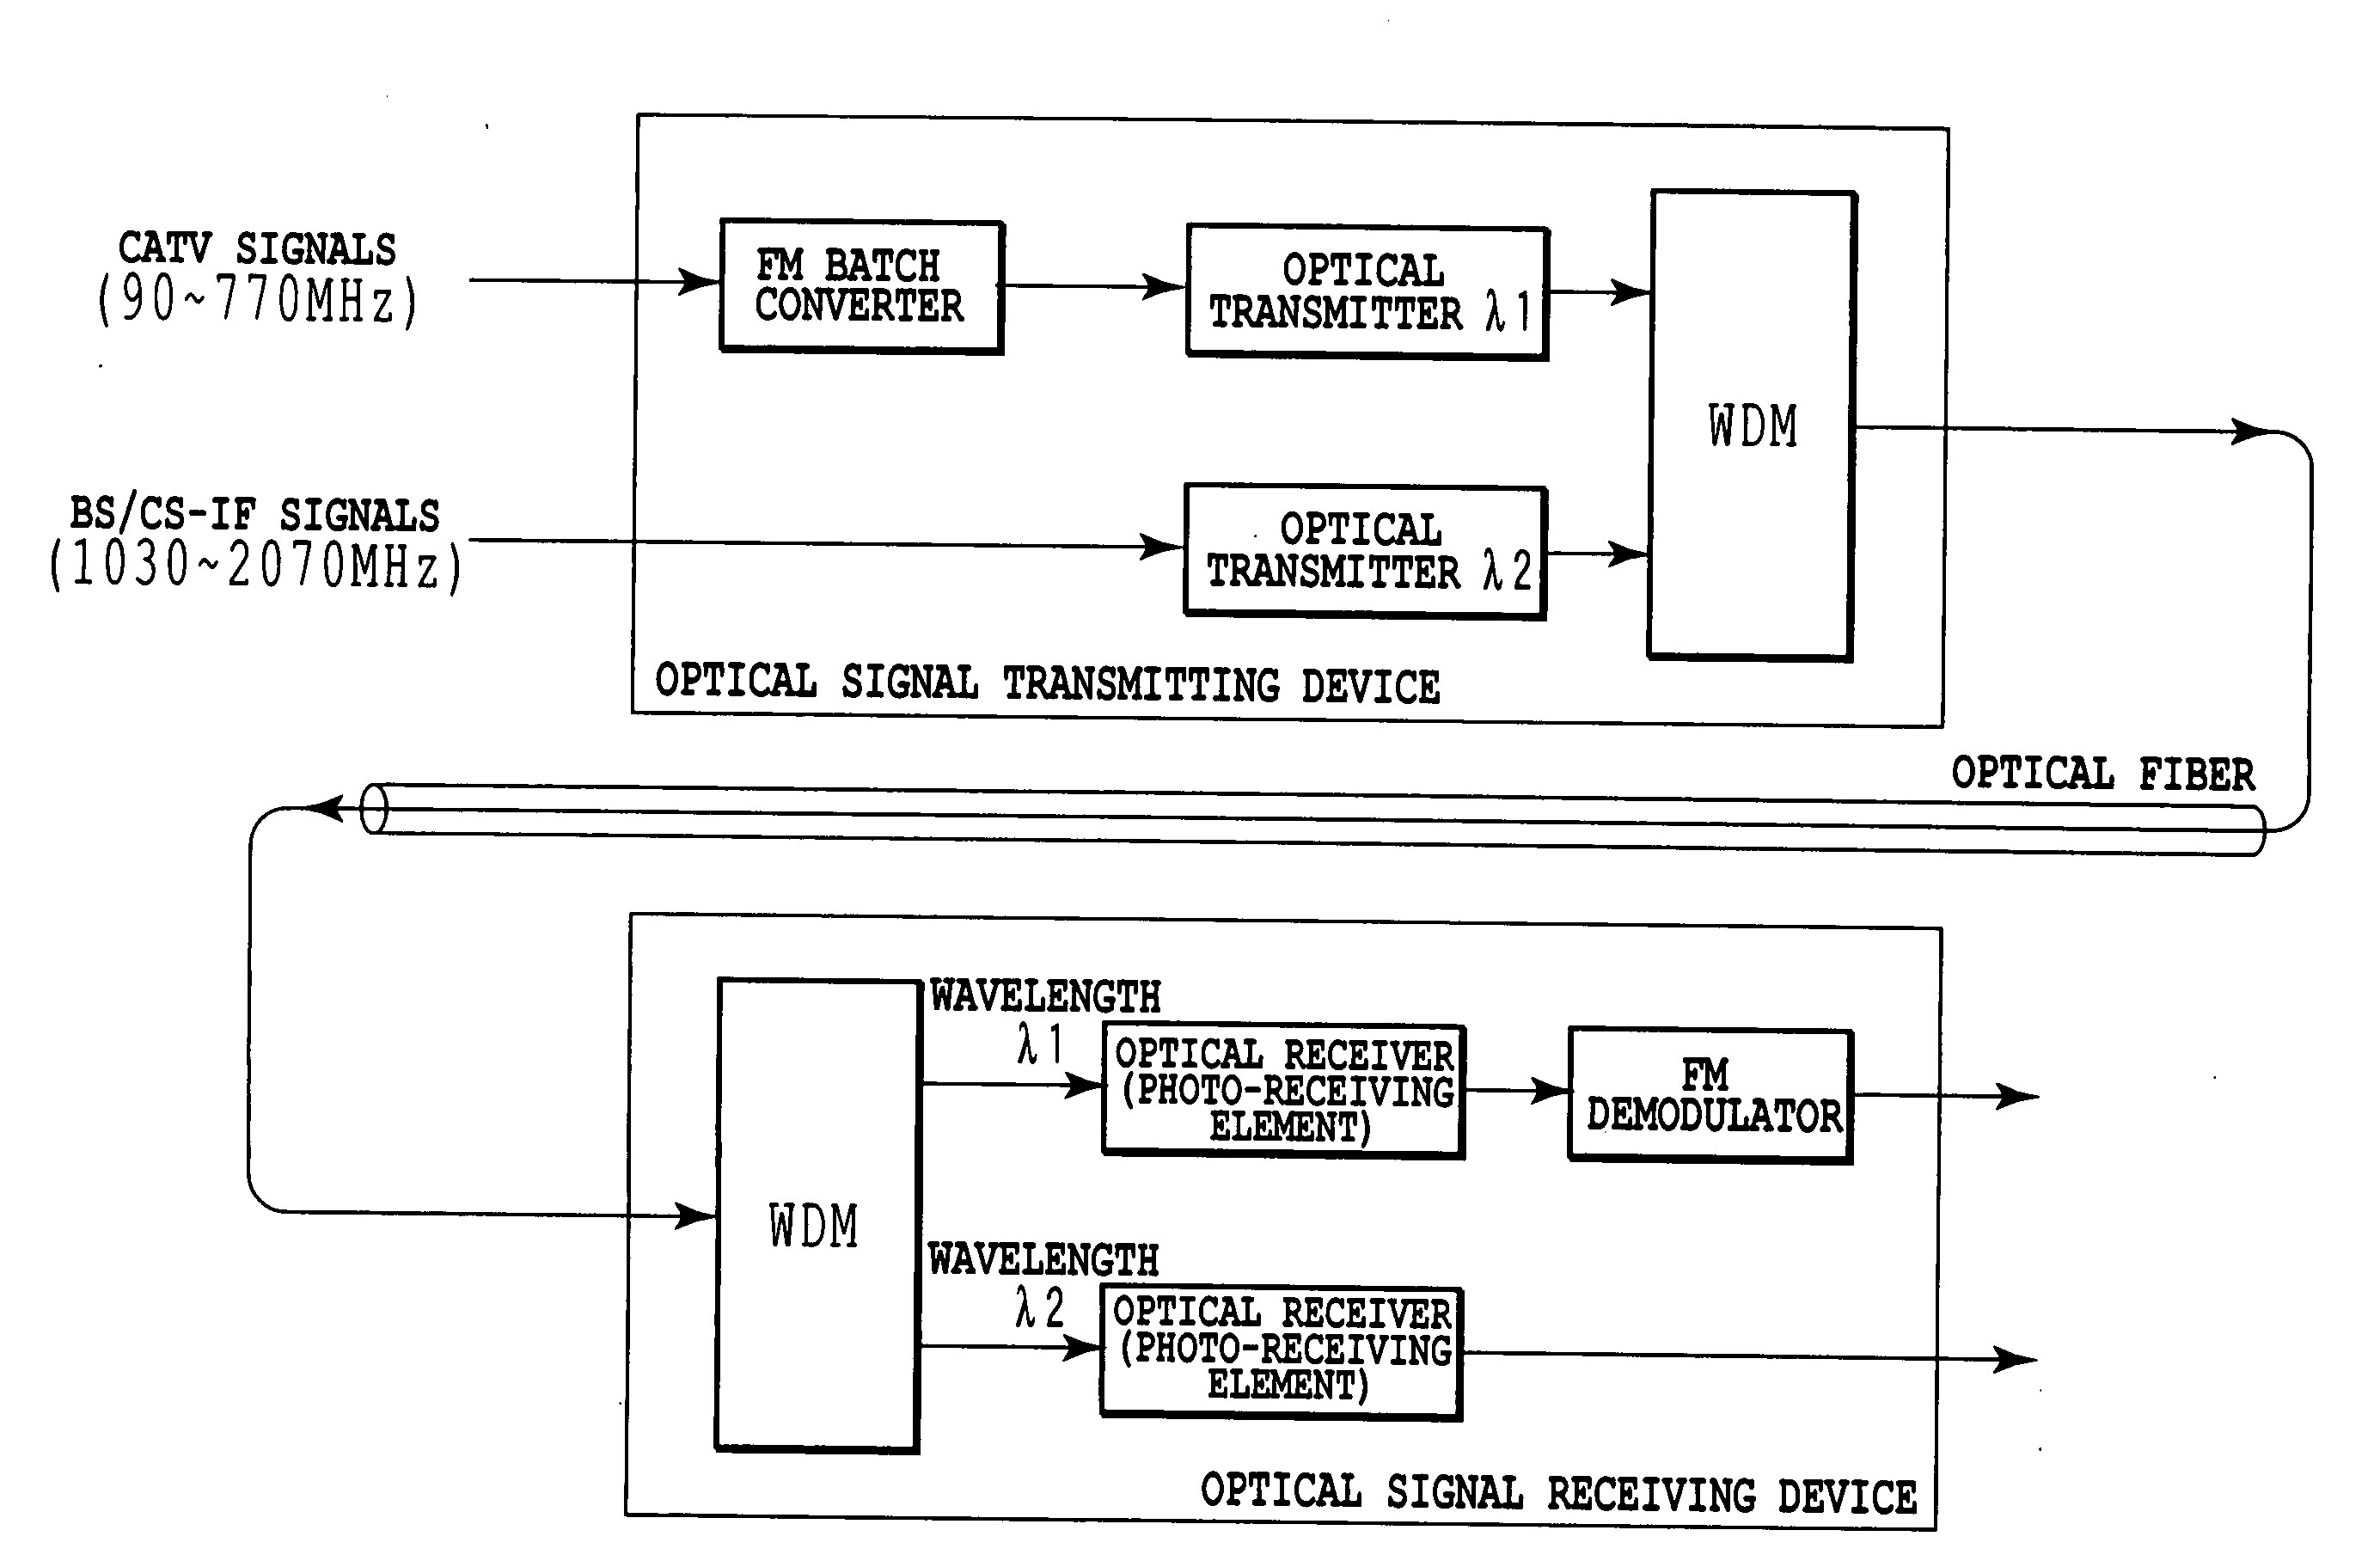 Apparatus, System And Method For Optical Signal Transmission